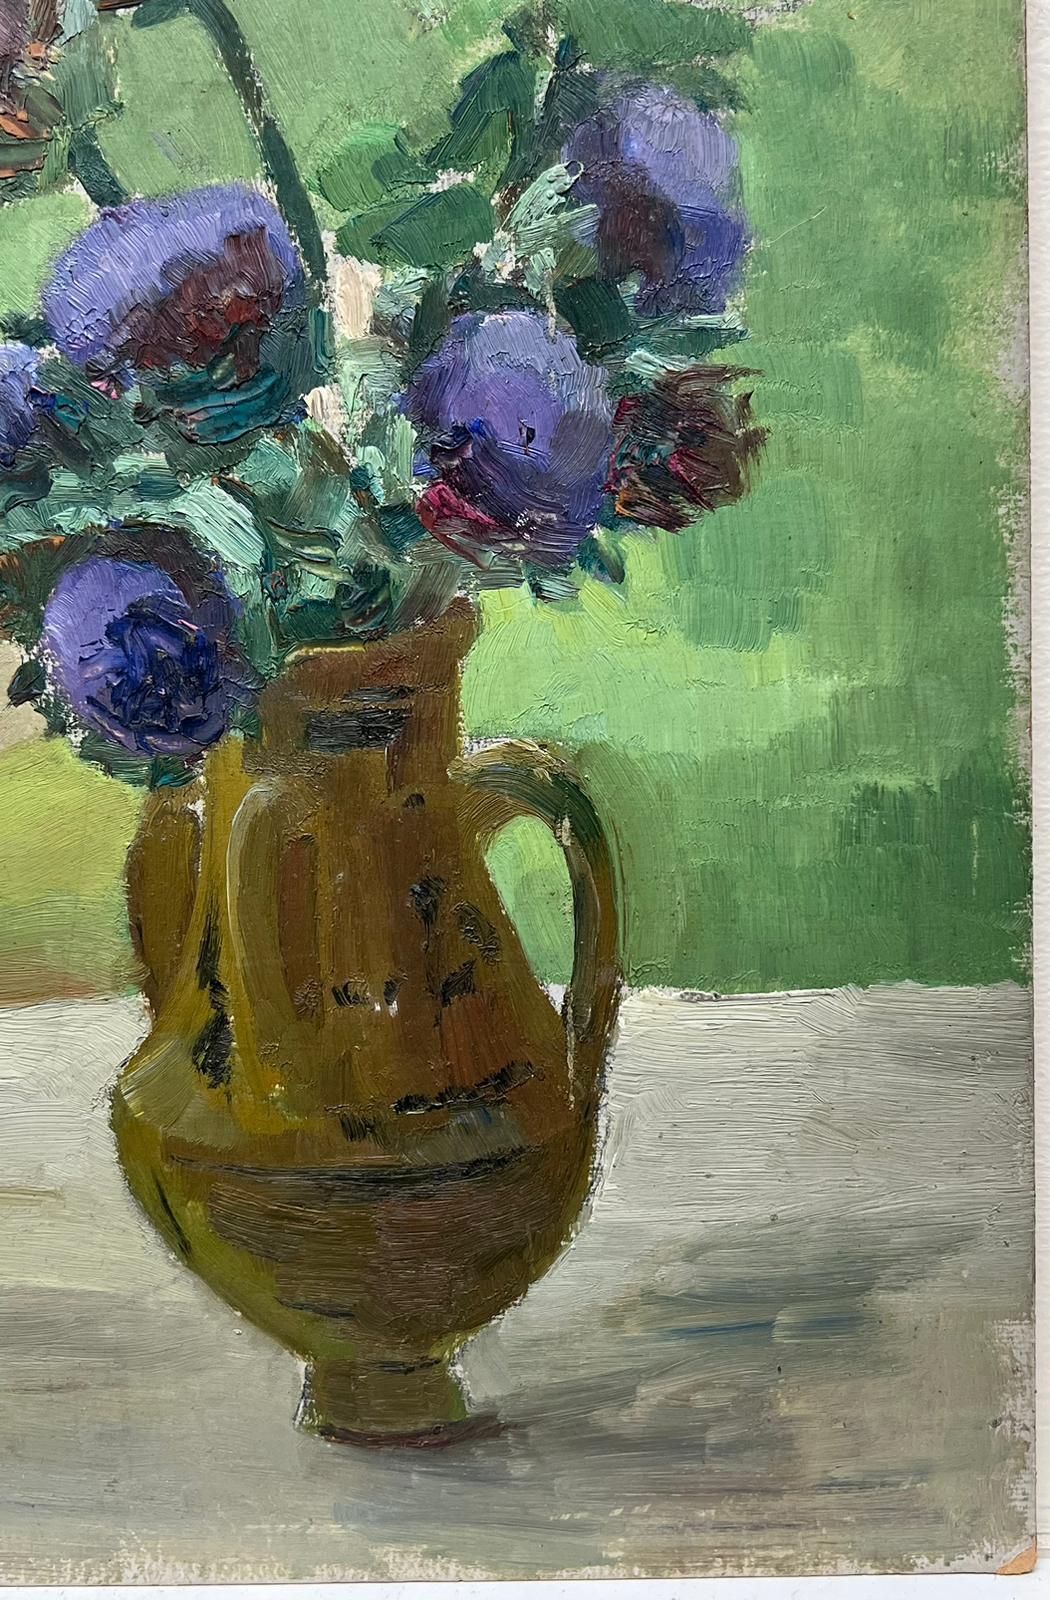 Purple Anemone's
by Louise Alix (French, 1888-1980) *see notes below
provenance stamp to the back 
oil painting on board, unframed
measures: 13 high by 9.5 inches wide
condition: overall very good and sound, a few scuffs and marks to the surface and